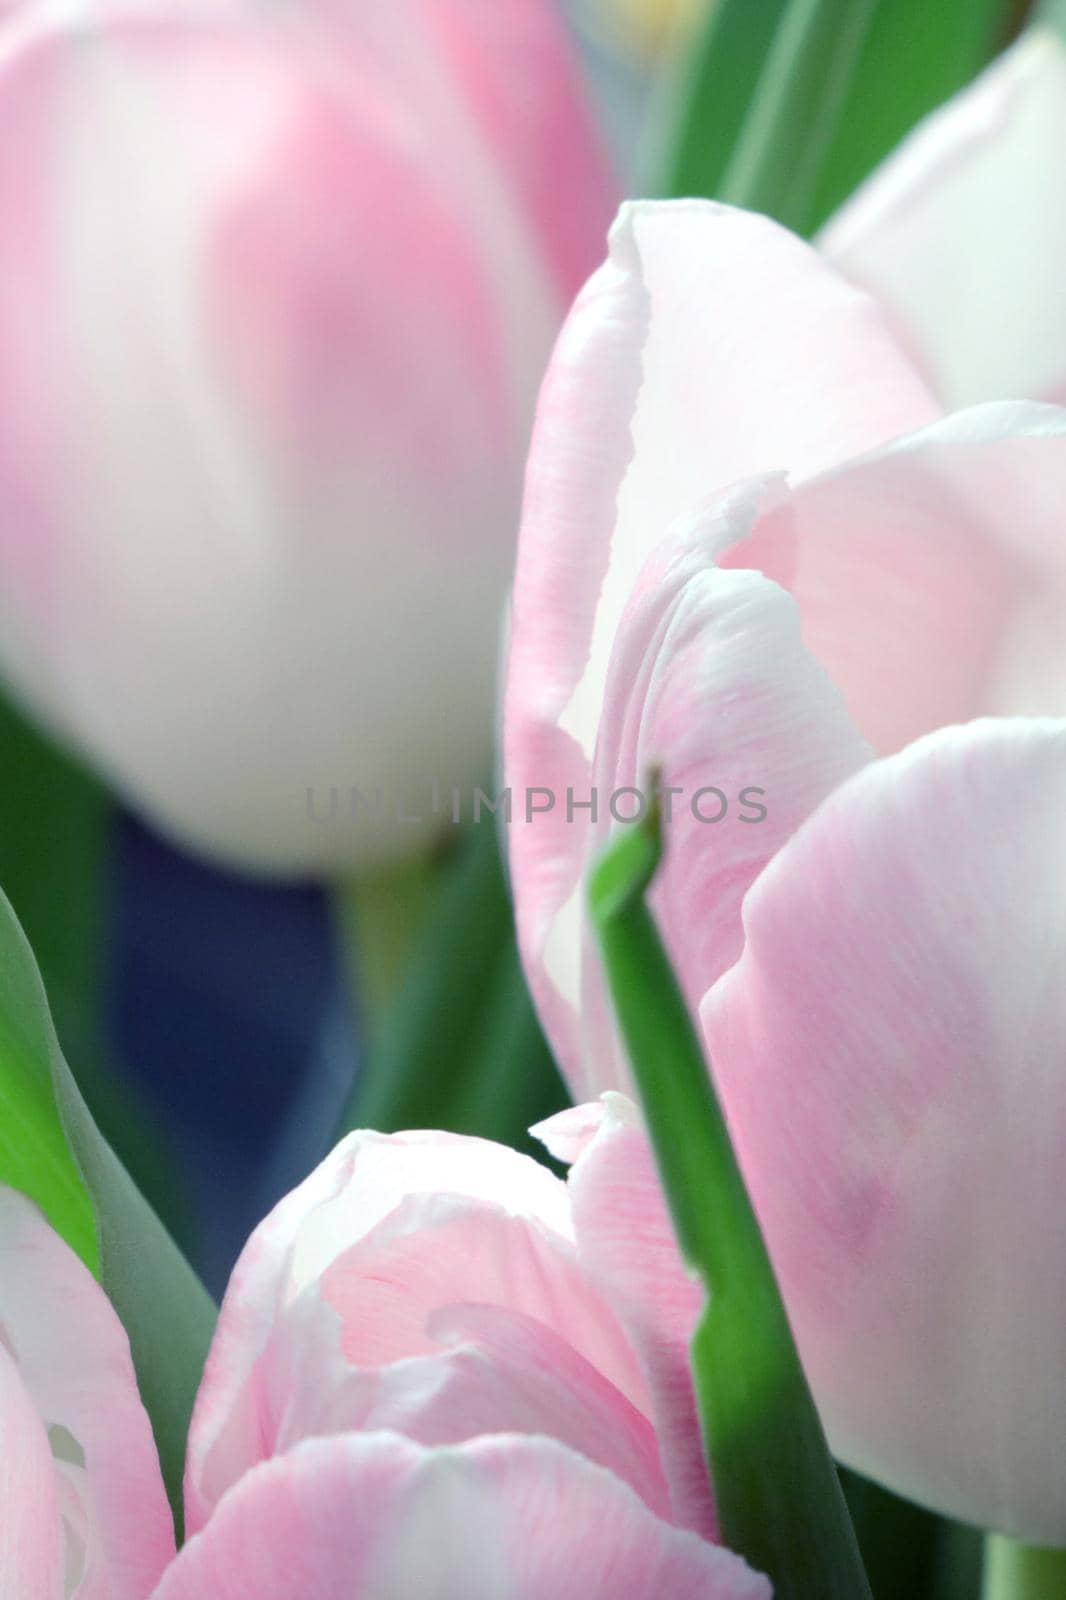 Vertical photo, selective focus, light blooming tulips. by kip02kas